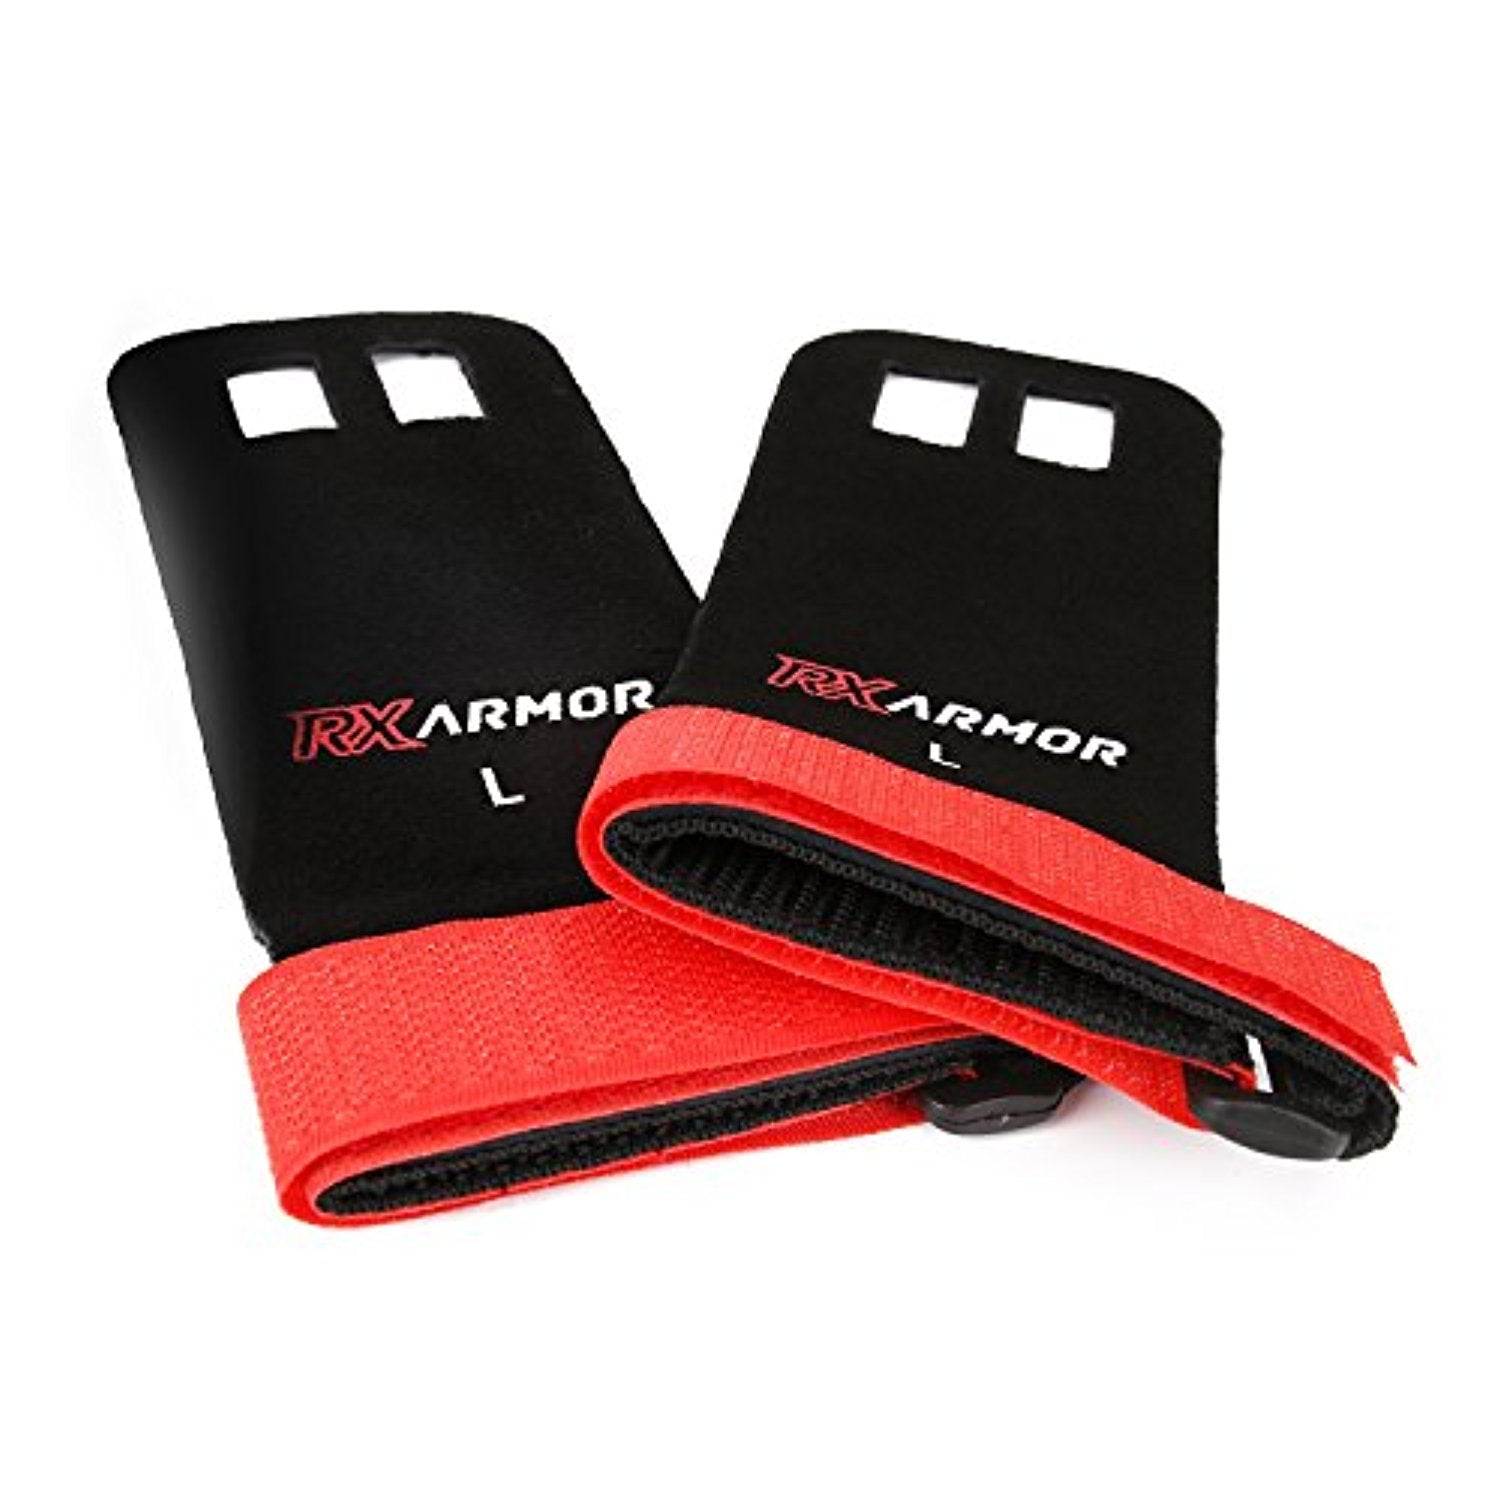 Gymnastics Hand Grips. Great For Gymnastics, Crossfit and Weightlifting - Everyday Crosstrain